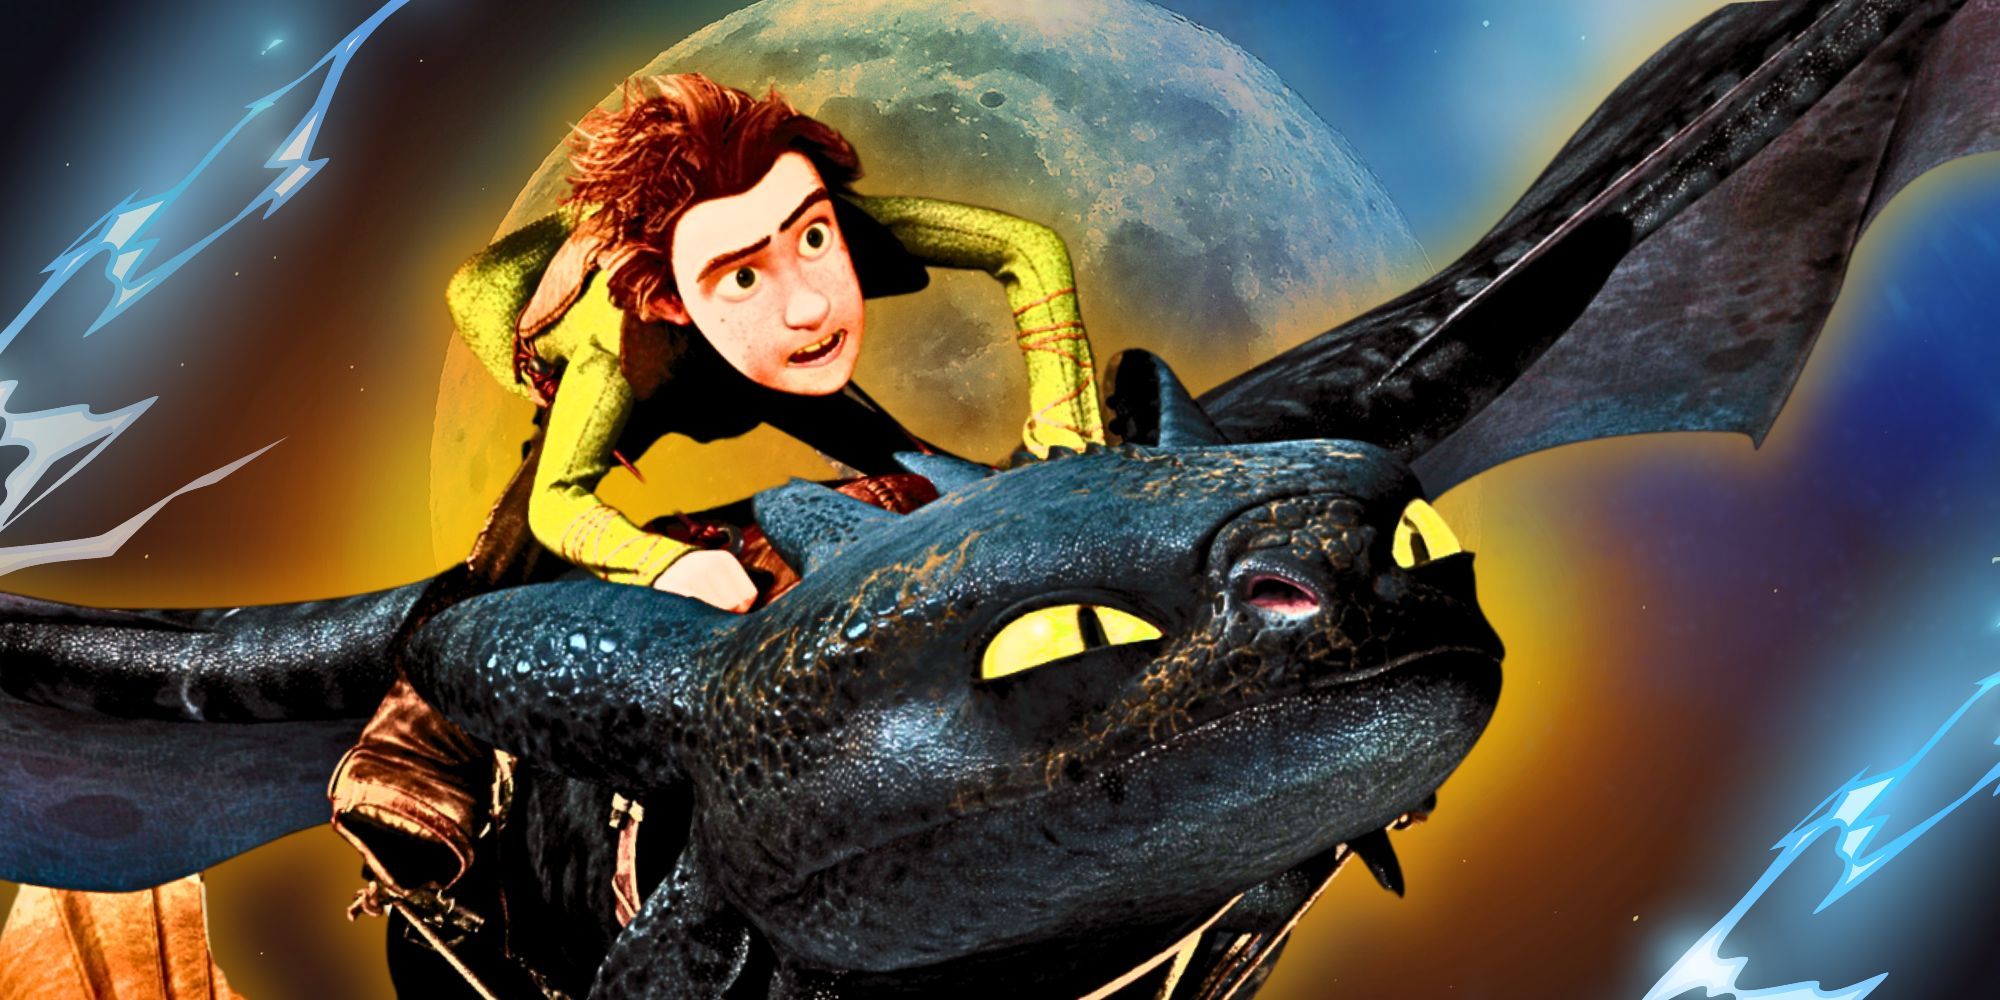 LOOK: 'How To Train Your Dragon' live-action finds its Hiccup and Astrid